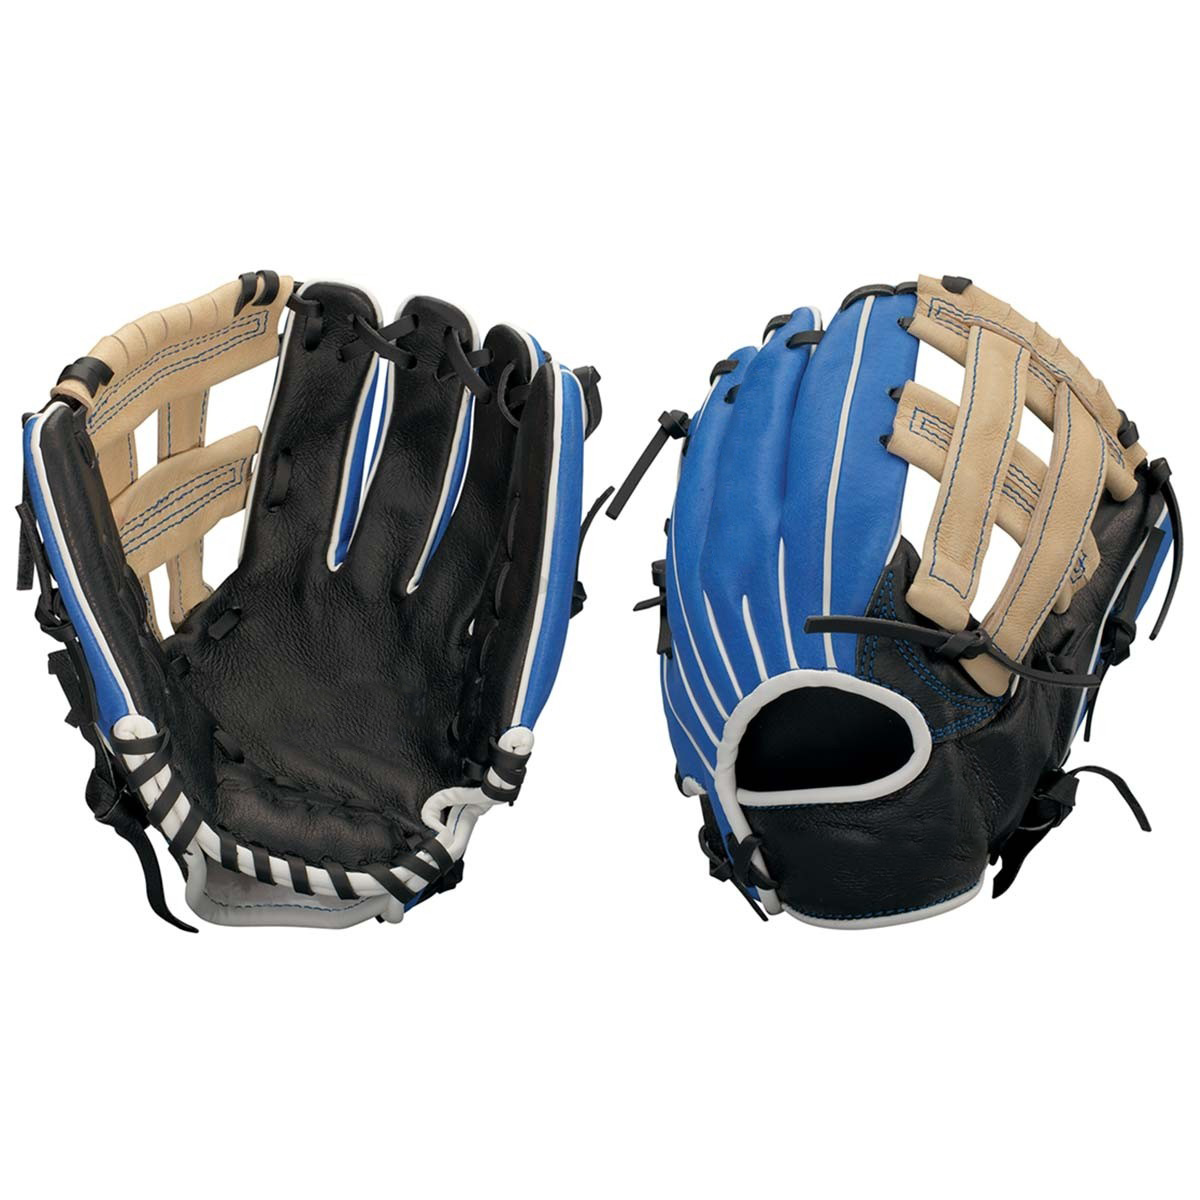 11" Nice buffering soft leather strong grip youth baseball gloves